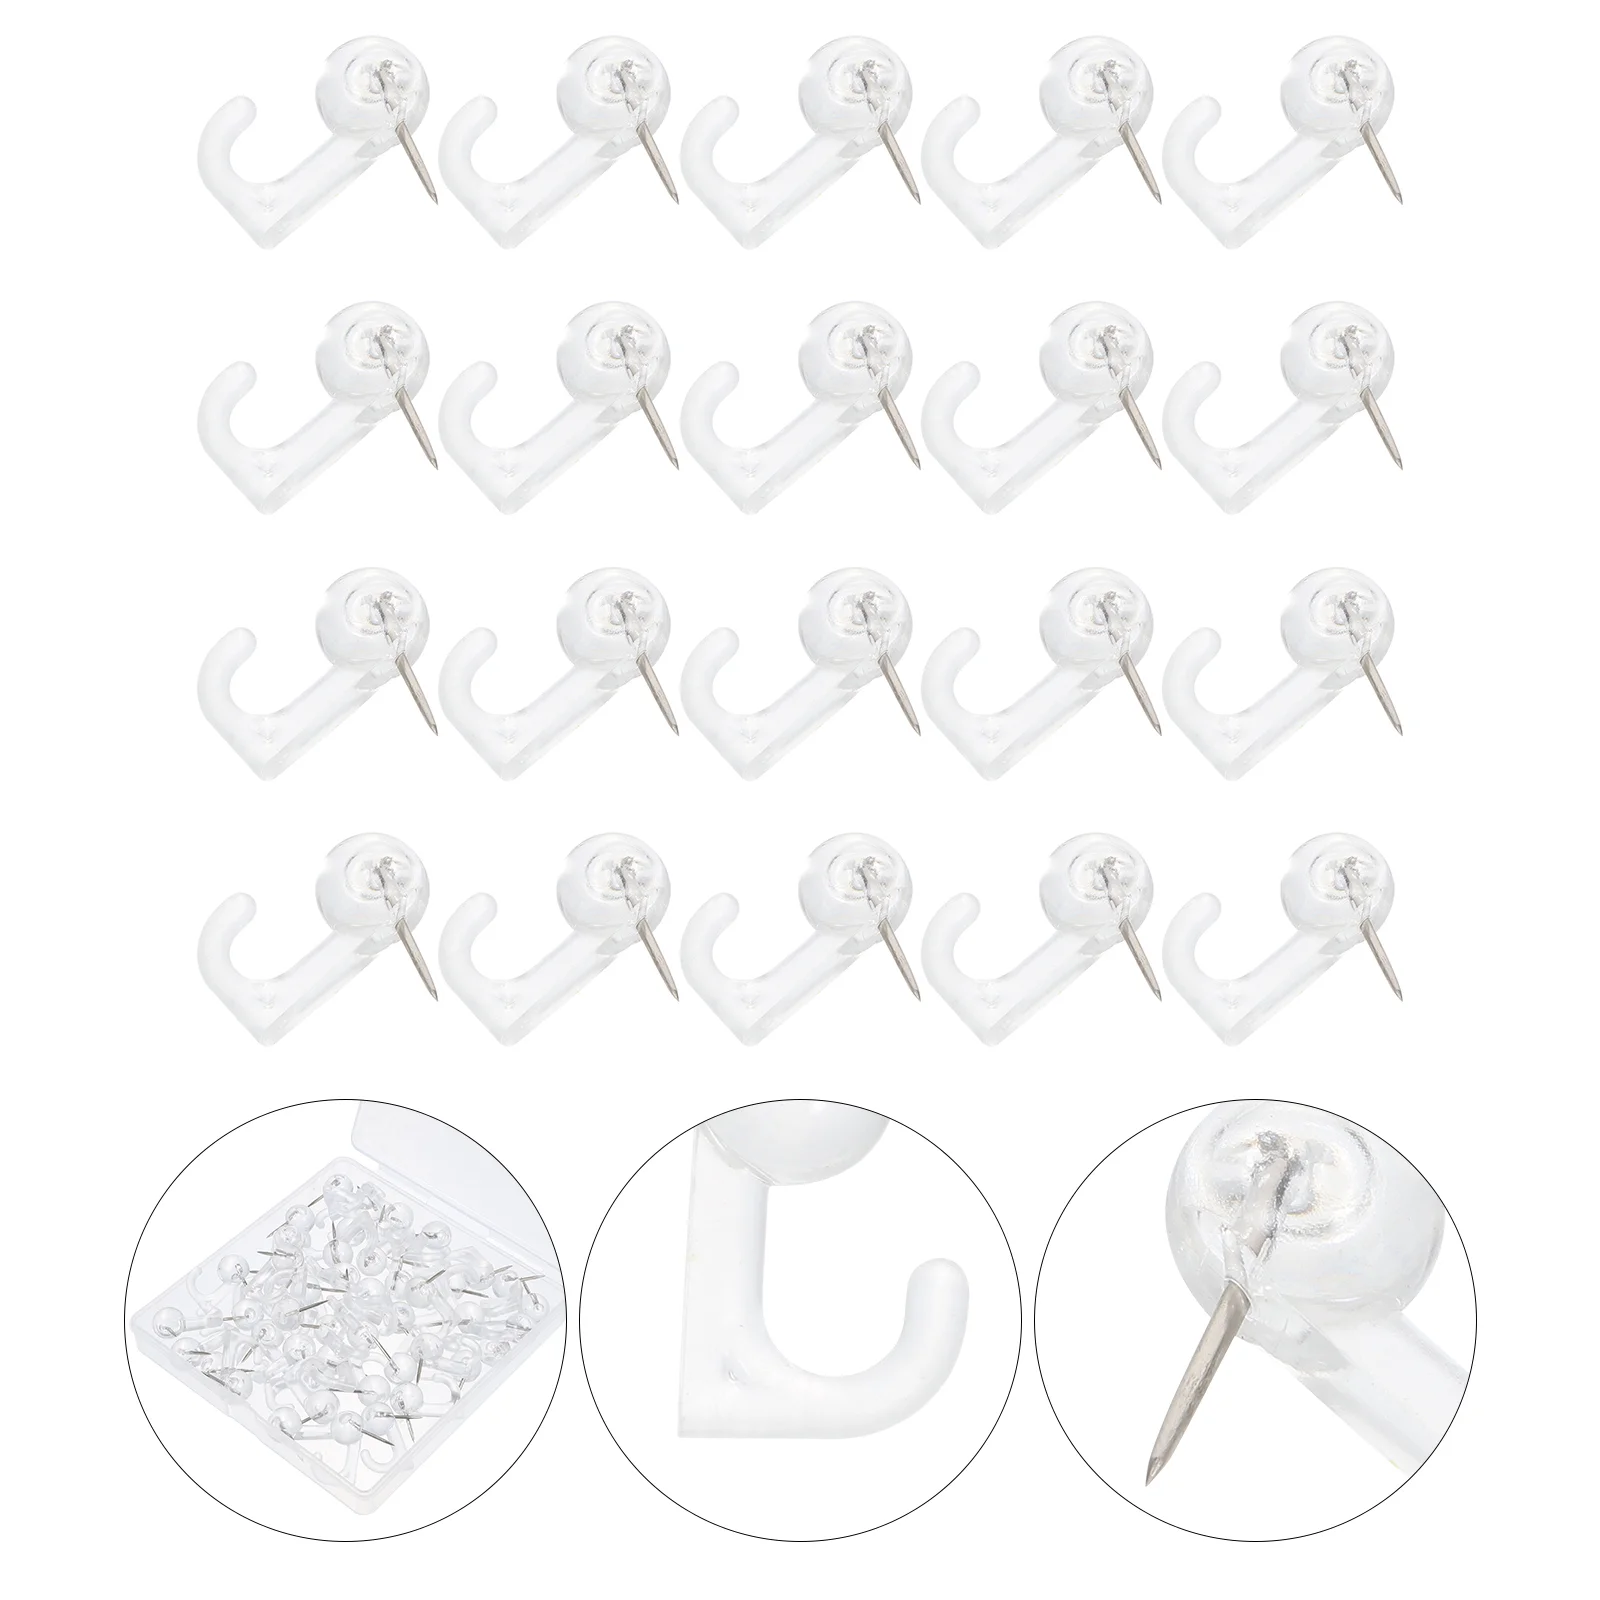 30 Pcs Push Pins Picture Hanger Hooks, Double Headed Nails Push Pin for Wall Hanging Picture, Decorative Small Hook Pins for Drywall Cork Board Home